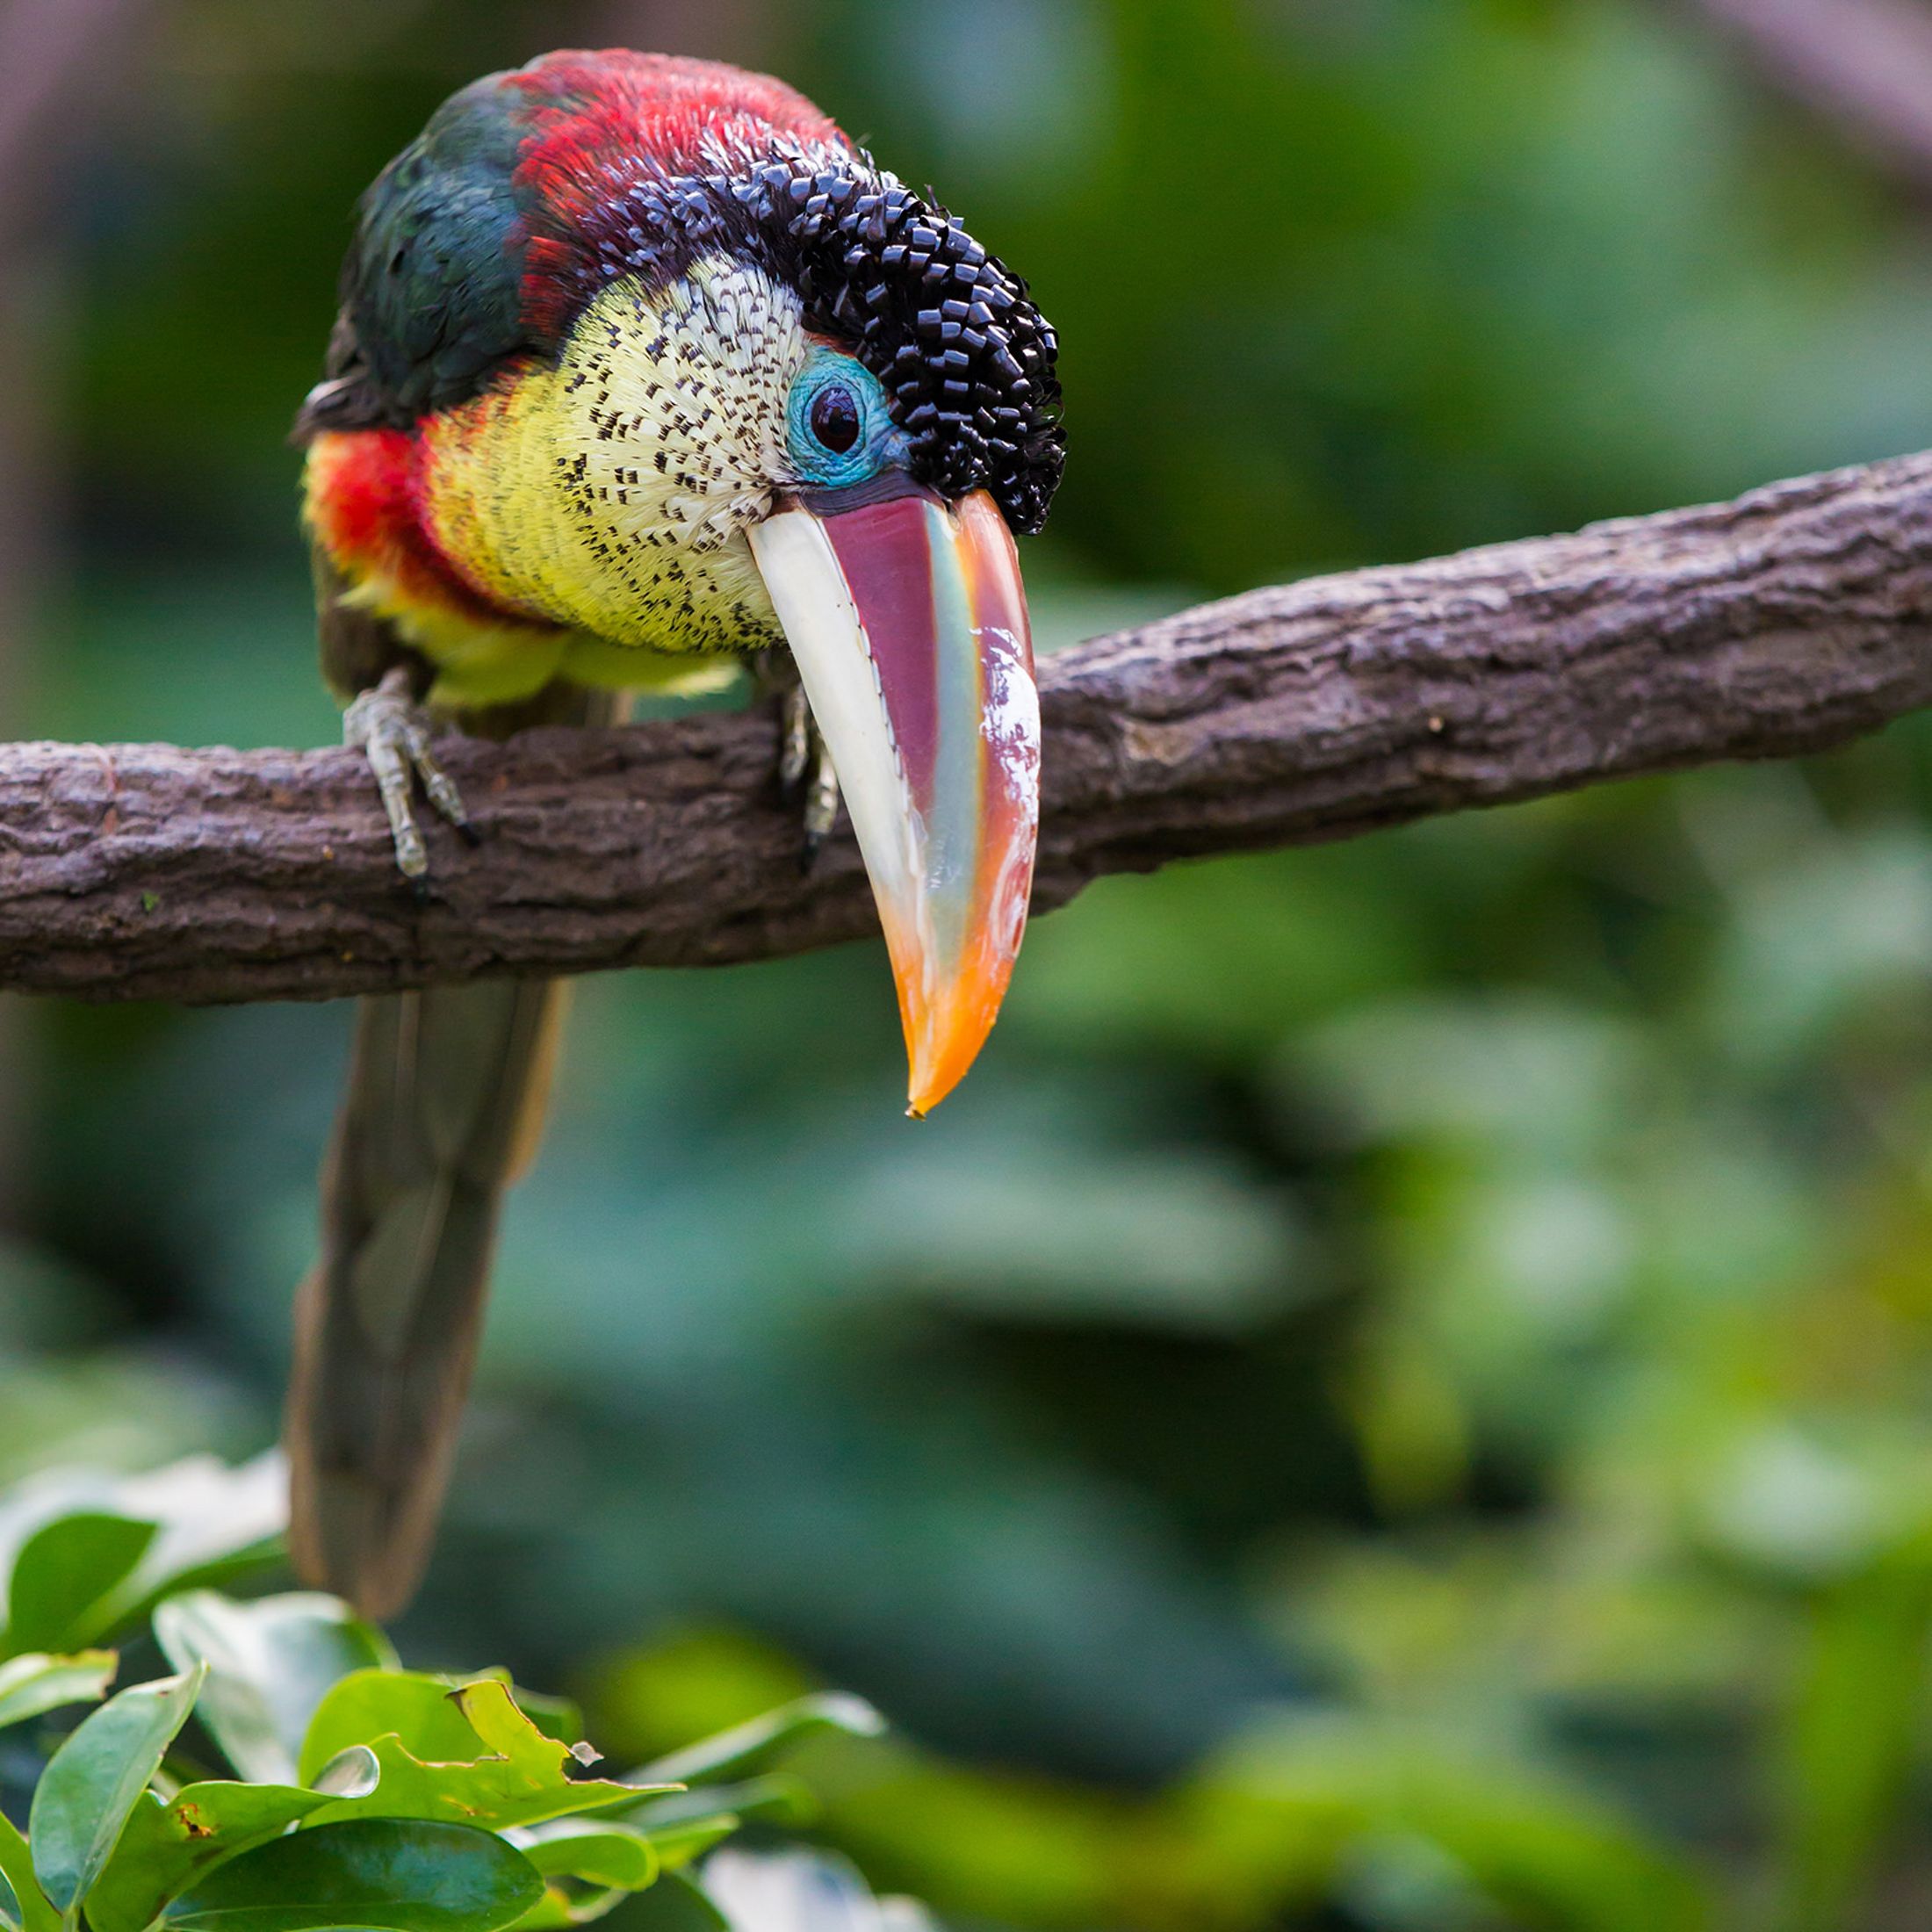 an aracari, a colorful bird resembling a toucan, sits on a branch looking down, surrounded by bright green foliage